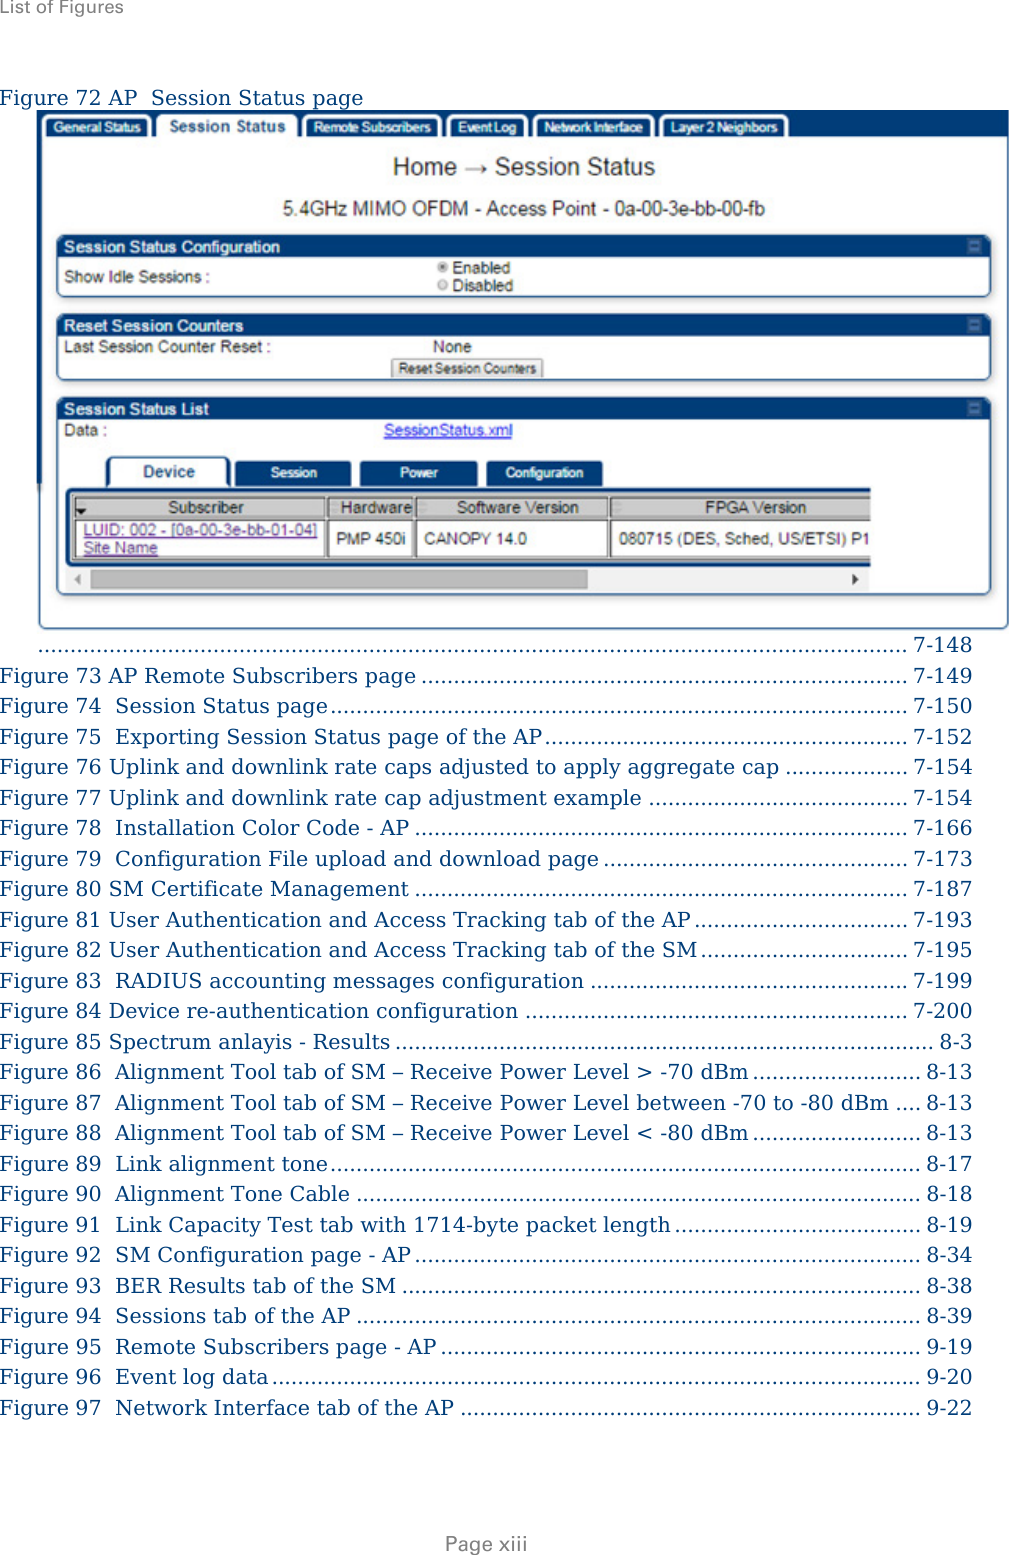 List of Figures     Page xiii Figure 72 AP  Session Status page ...................................................................................................................................... 7-148 Figure 73 AP Remote Subscribers page ........................................................................... 7-149 Figure 74  Session Status page ......................................................................................... 7-150 Figure 75  Exporting Session Status page of the AP ........................................................ 7-152 Figure 76 Uplink and downlink rate caps adjusted to apply aggregate cap ................... 7-154 Figure 77 Uplink and downlink rate cap adjustment example ........................................ 7-154 Figure 78  Installation Color Code - AP ............................................................................ 7-166 Figure 79  Configuration File upload and download page ............................................... 7-173 Figure 80 SM Certificate Management ............................................................................ 7-187 Figure 81 User Authentication and Access Tracking tab of the AP ................................. 7-193 Figure 82 User Authentication and Access Tracking tab of the SM ................................ 7-195 Figure 83  RADIUS accounting messages configuration ................................................. 7-199 Figure 84 Device re-authentication configuration ........................................................... 7-200 Figure 85 Spectrum anlayis - Results ................................................................................... 8-3 Figure 86  Alignment Tool tab of SM – Receive Power Level &gt; -70 dBm .......................... 8-13 Figure 87  Alignment Tool tab of SM – Receive Power Level between -70 to -80 dBm .... 8-13 Figure 88  Alignment Tool tab of SM – Receive Power Level &lt; -80 dBm .......................... 8-13 Figure 89  Link alignment tone ........................................................................................... 8-17 Figure 90  Alignment Tone Cable ....................................................................................... 8-18 Figure 91  Link Capacity Test tab with 1714-byte packet length ...................................... 8-19 Figure 92  SM Configuration page - AP .............................................................................. 8-34 Figure 93  BER Results tab of the SM ................................................................................ 8-38 Figure 94  Sessions tab of the AP ....................................................................................... 8-39 Figure 95  Remote Subscribers page - AP .......................................................................... 9-19 Figure 96  Event log data .................................................................................................... 9-20 Figure 97  Network Interface tab of the AP ....................................................................... 9-22 